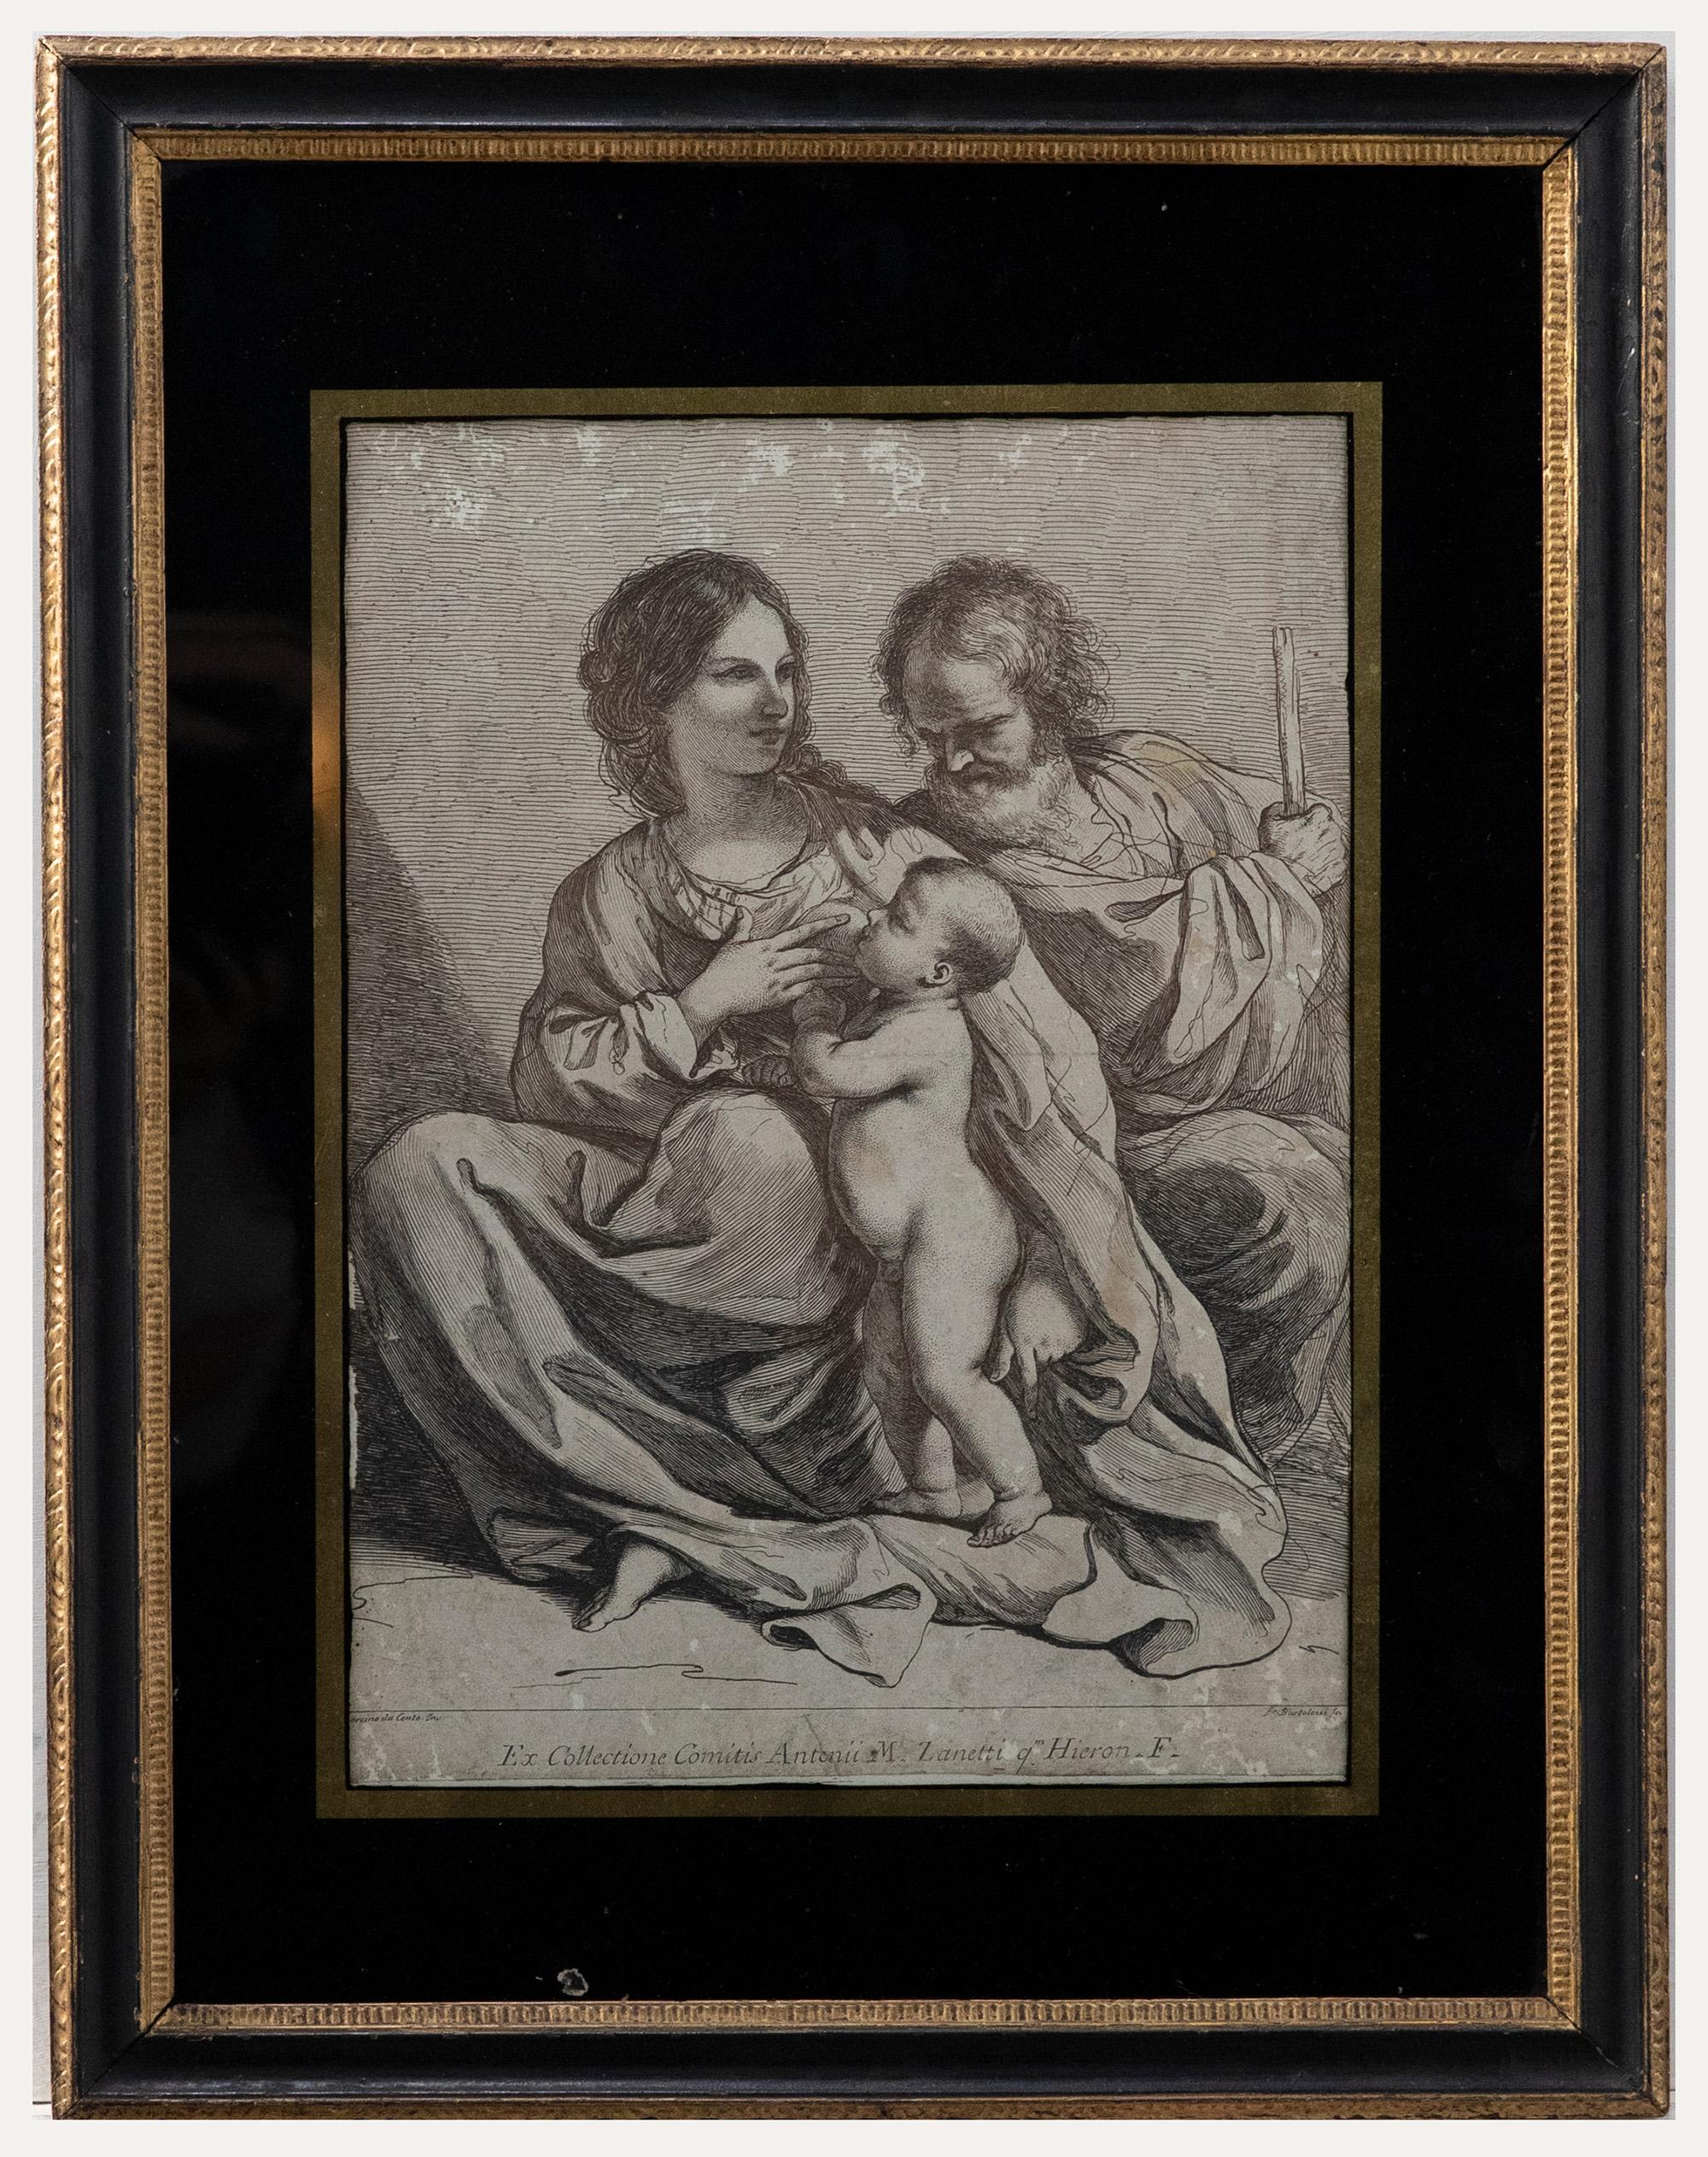 A charming engraving after Guercino depicting the holy family. Signed in plate. Inscribed in Latin 'from the collection of Count Anotnius M. Lanetti'. Presented in a verre eglomise mount and Hogarth style frame. On paper.